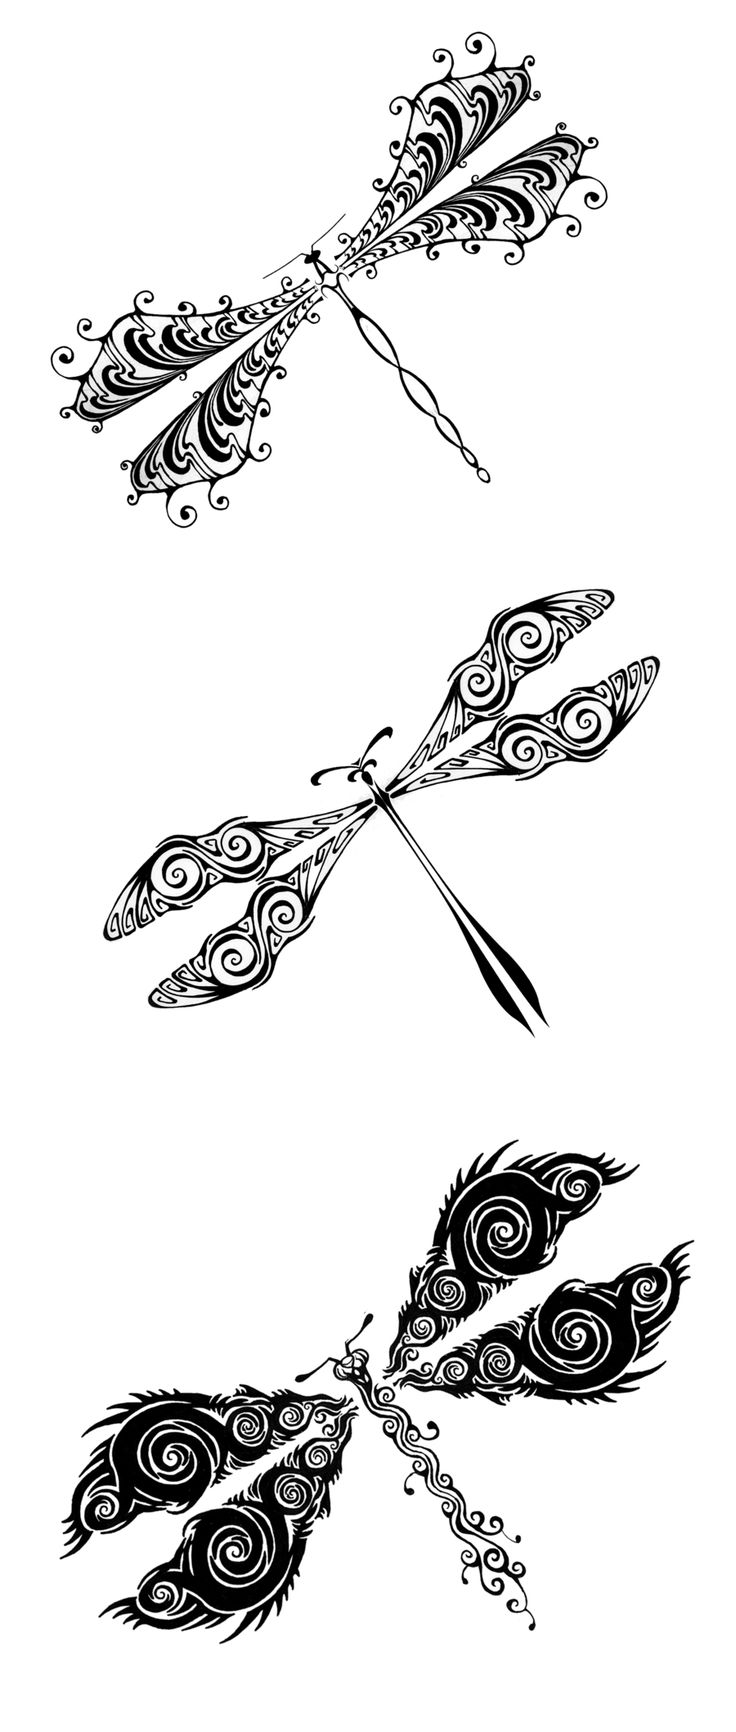 Tribal dragonfly tattoos for my sister | Doodles